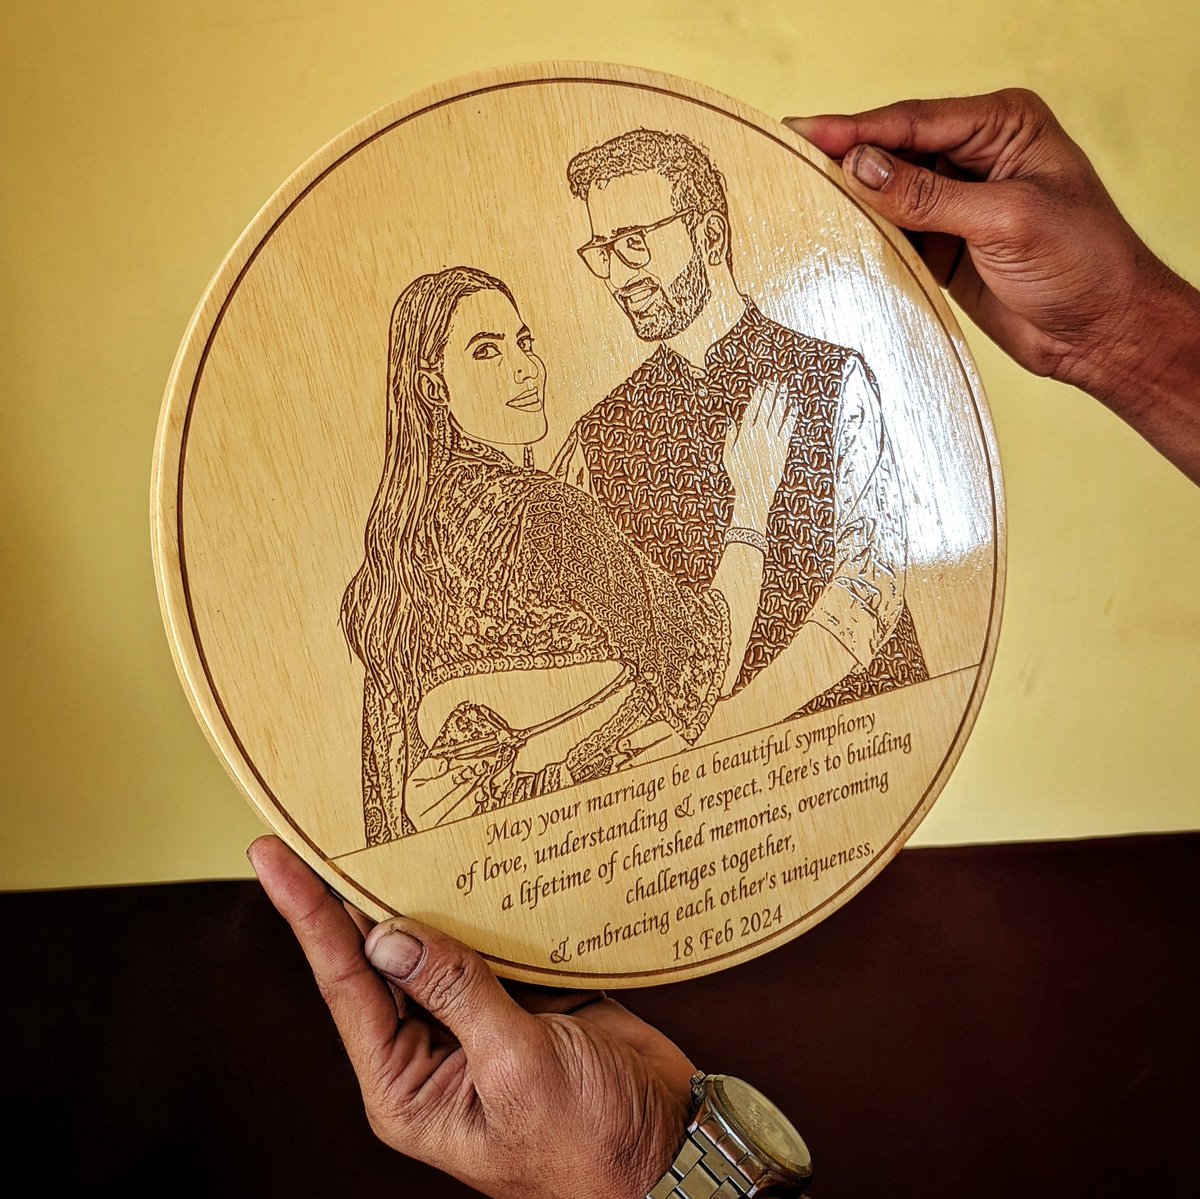 Imagine your favorite wedding picture or another cherished memory engraved directly onto the warm, natural grain of wood. Order yours today. ❤️ #marriageanniversarygifts #personalizedgifts #woodenphotoframe #cherishedmemories #timelesslove #uniquepresent #woodgeek #woodgeekstore